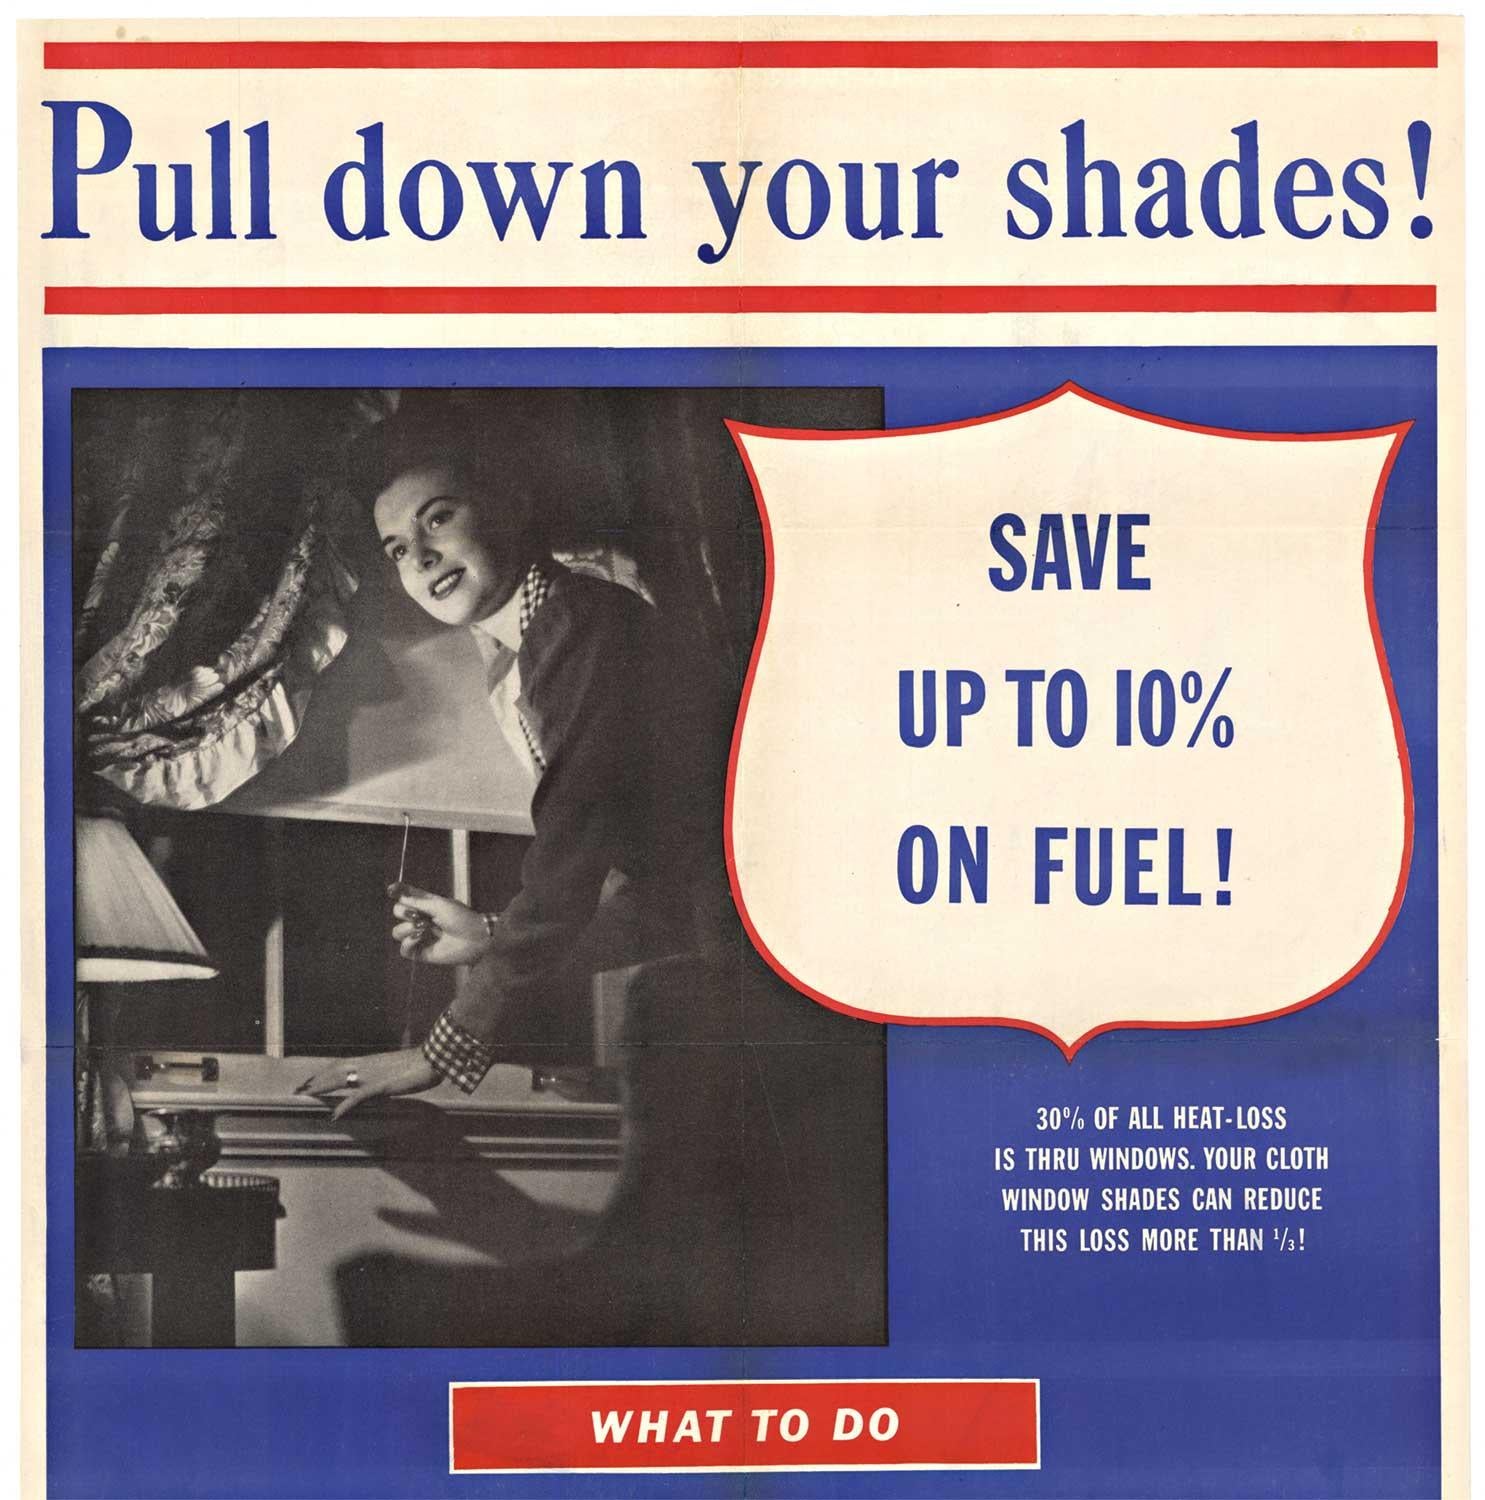 Original 'Pull down your shades!